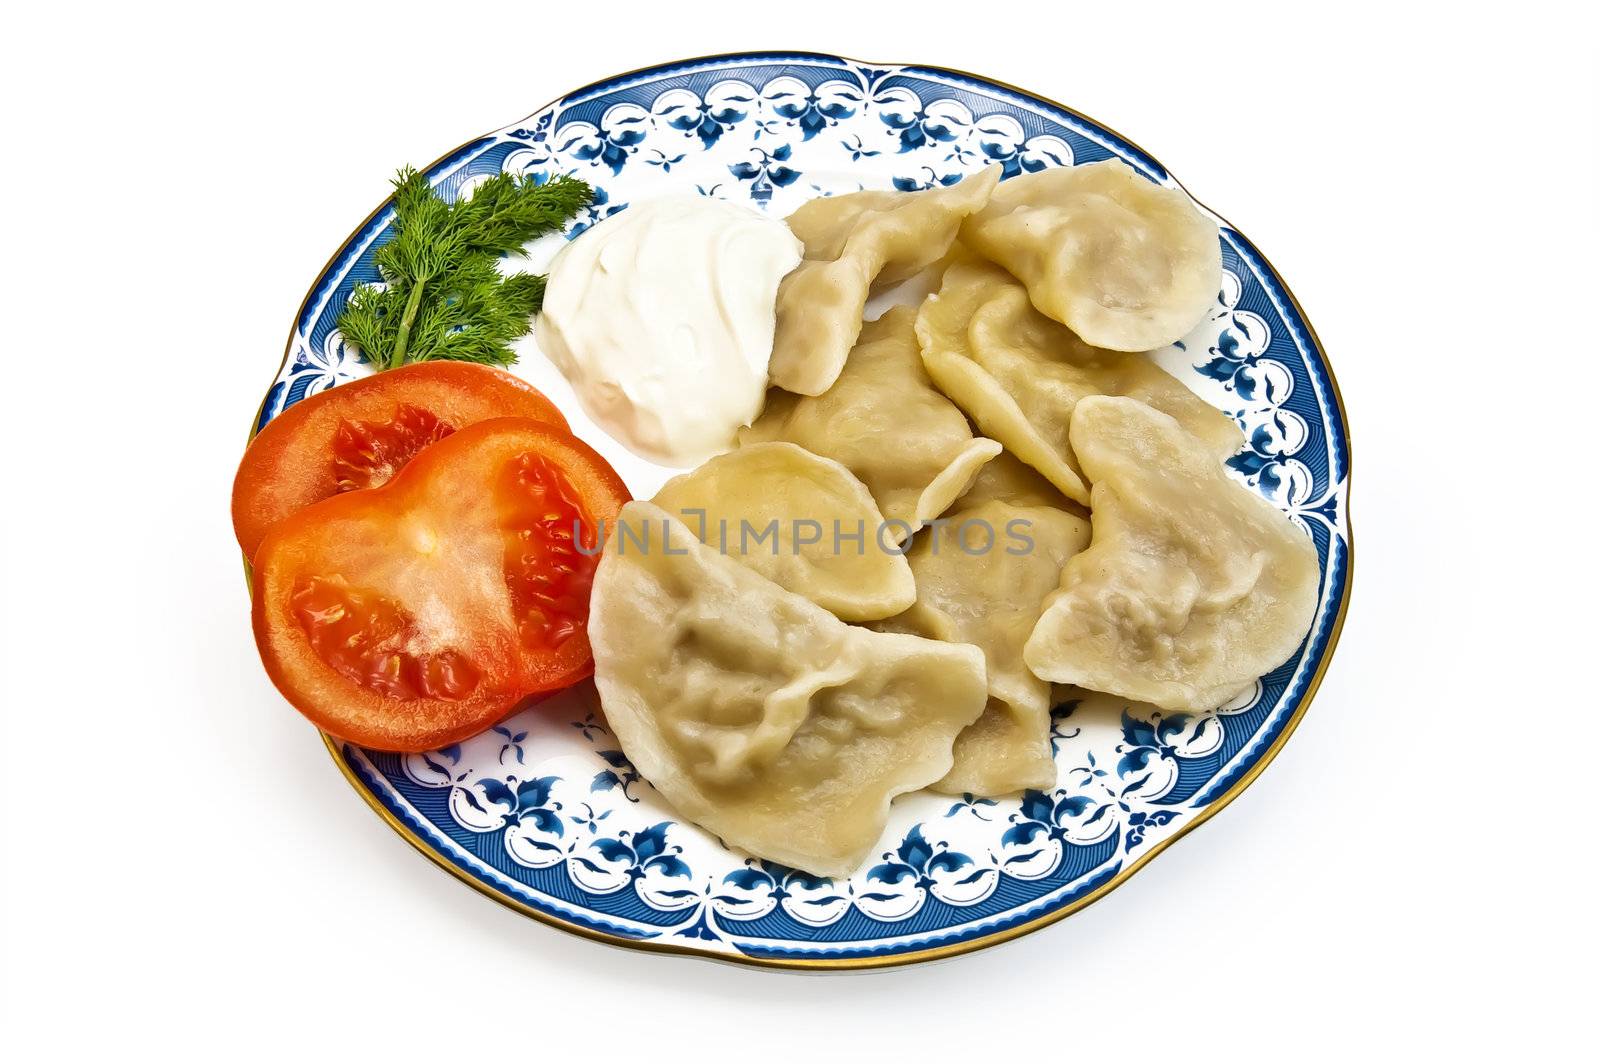 Dumplings, two slices of tomato, a sprig of dill and sour cream on the porcelain plate isolated on white background